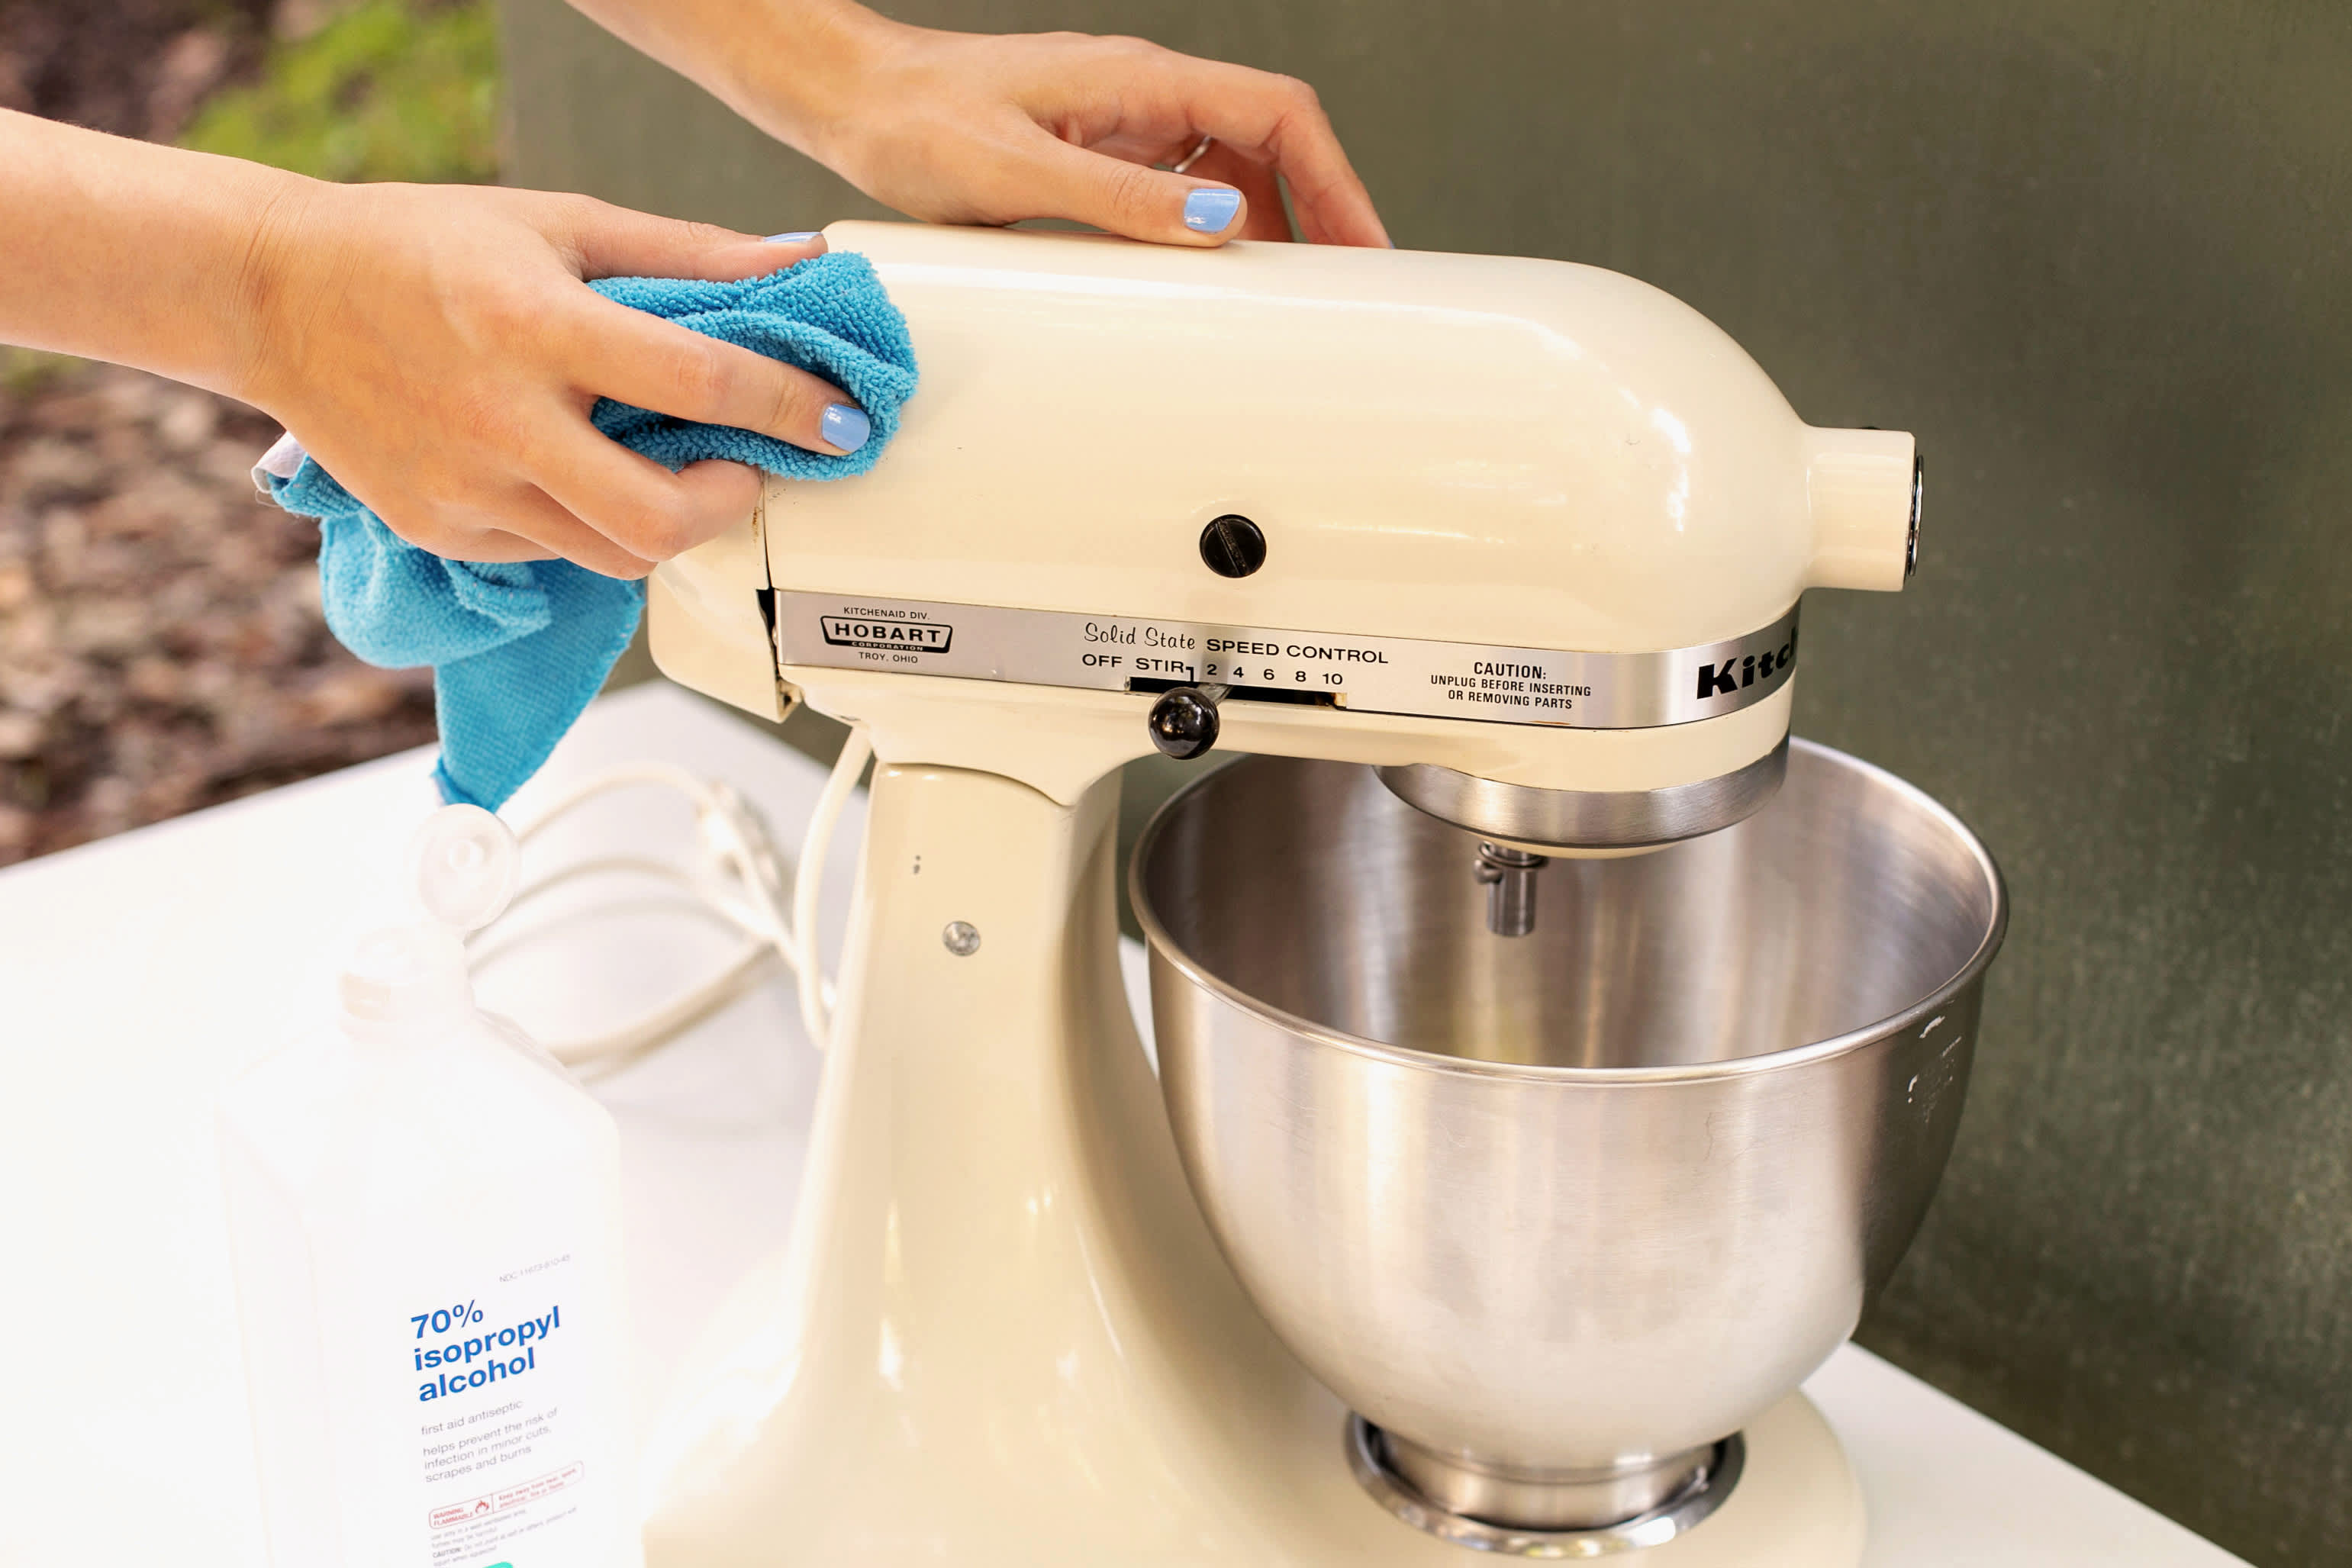 How to: Paint Your Kitchen Aid Mixer - Little Bits of